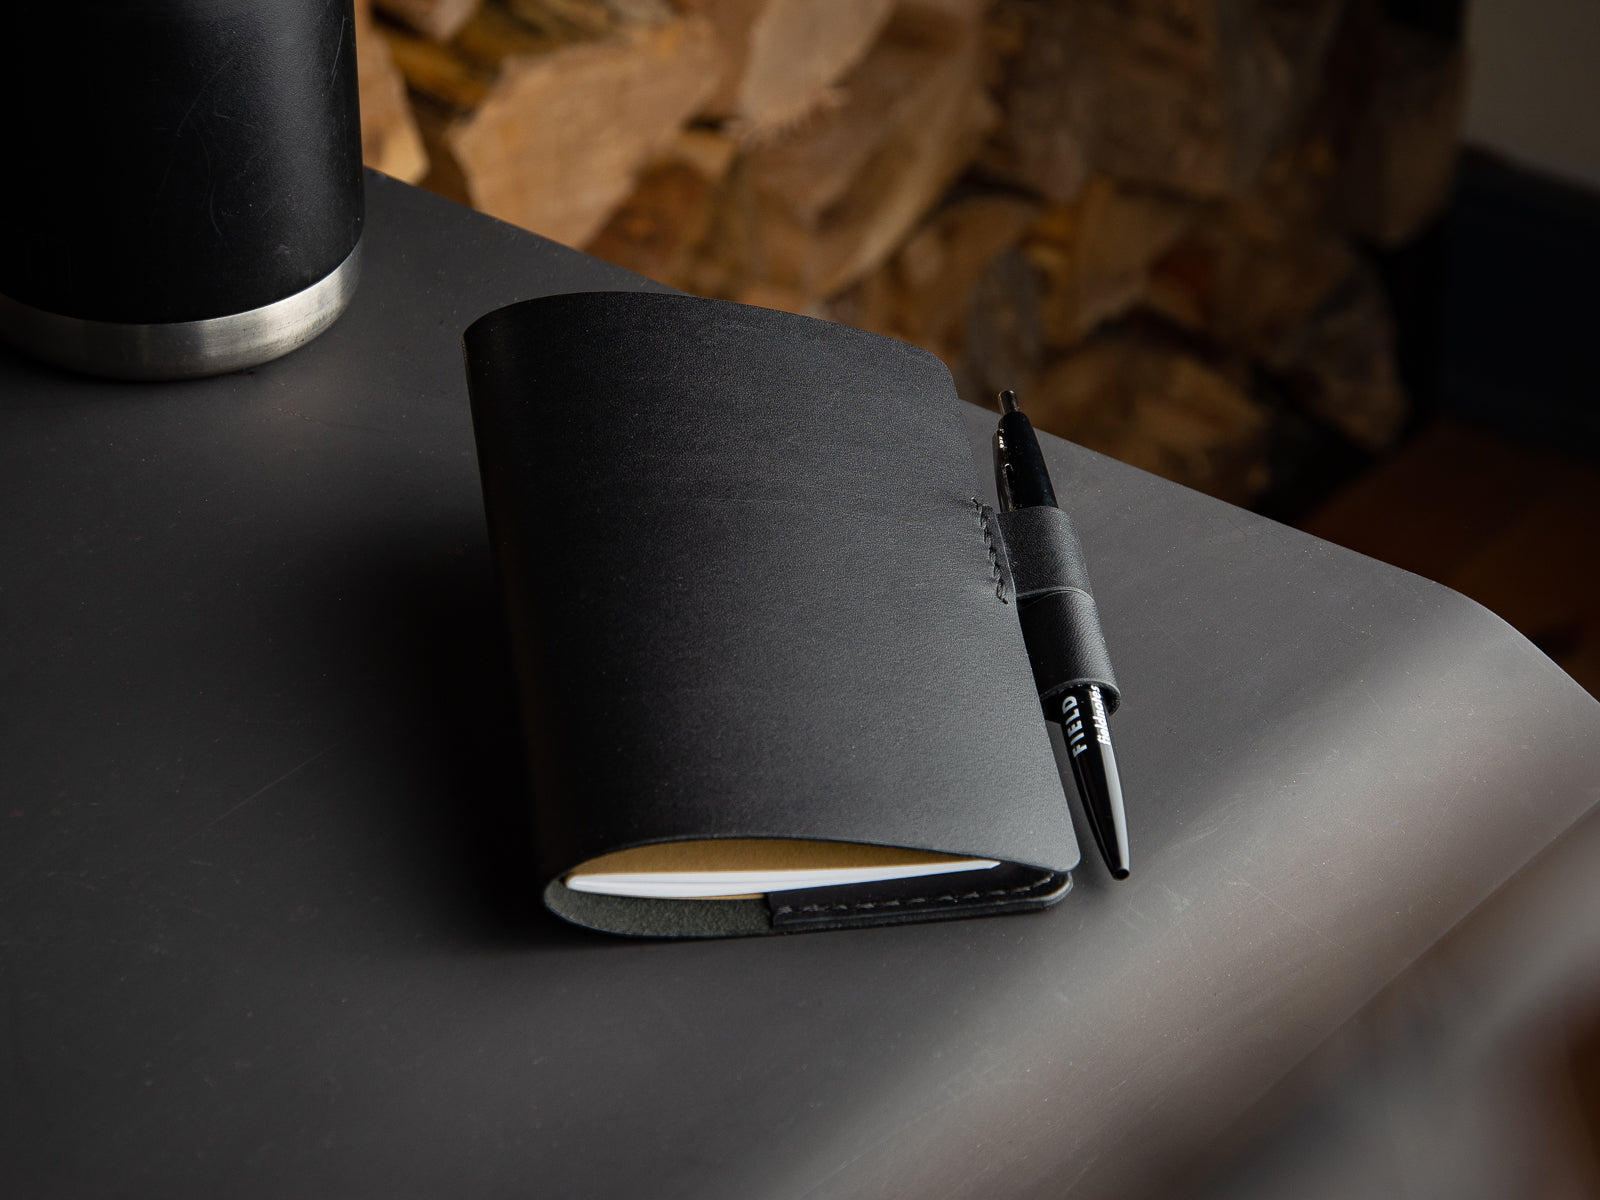 Closed over black notebook sleeve with fieldnotes notebook